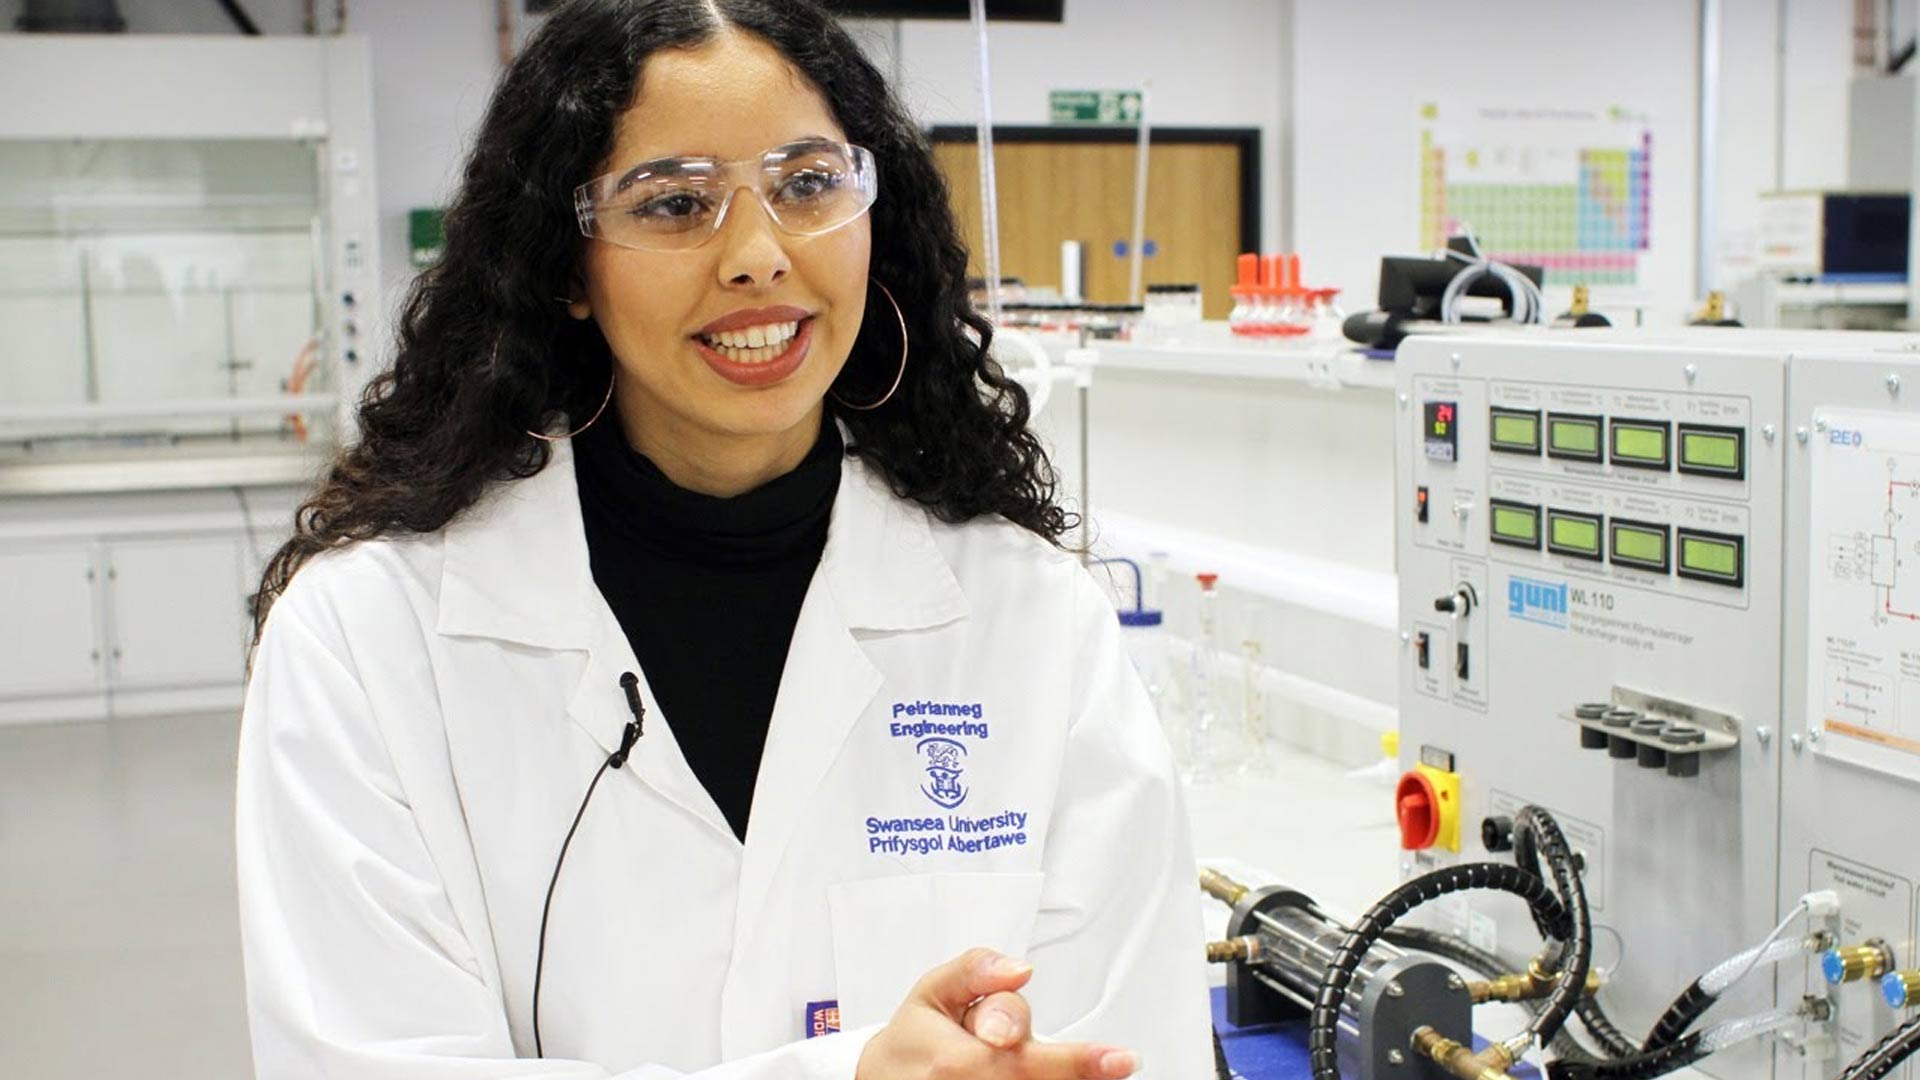 Female student from Egypt in a laboratory coat talking in a science lab. 